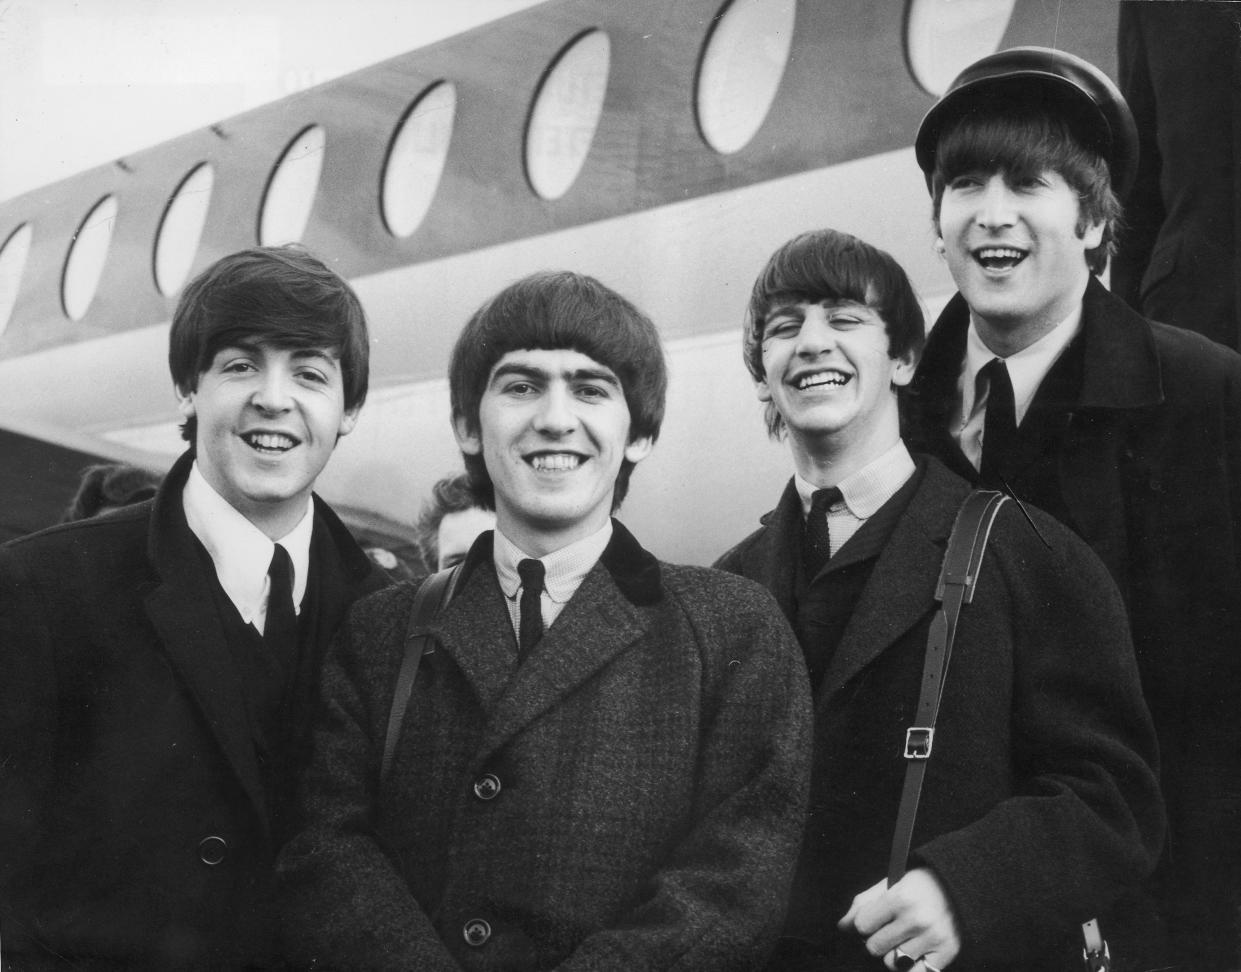 392279 03: (FILE PHOTO) The Beatles, left to right, Paul McCartney, George Harrison, Ringo Starr and John Lennon (1940 - 1980) arrive at London Airport February 6, 1964, after a trip to Paris. It was reported November 8, 2001 that Harrison is undergoing cancer treatment in a Staten Island, N.Y., hospital. The 58-year-old ex-Beatle was diagnosed with lung cancer and a brain tumor earlier this year. (Photo by Getty Images)